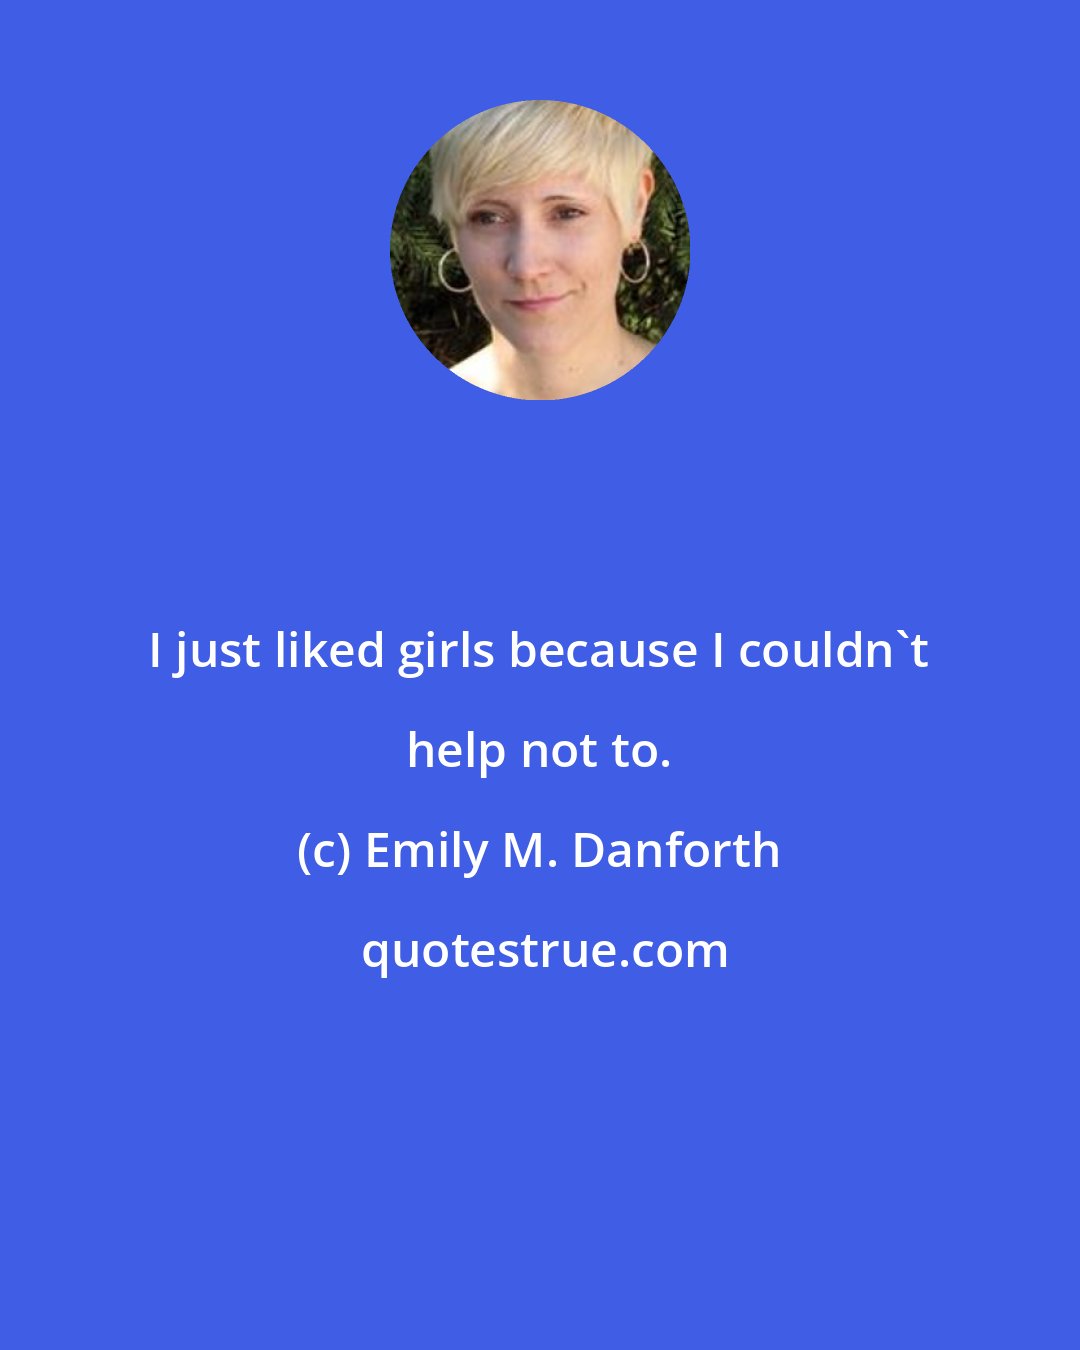 Emily M. Danforth: I just liked girls because I couldn't help not to.